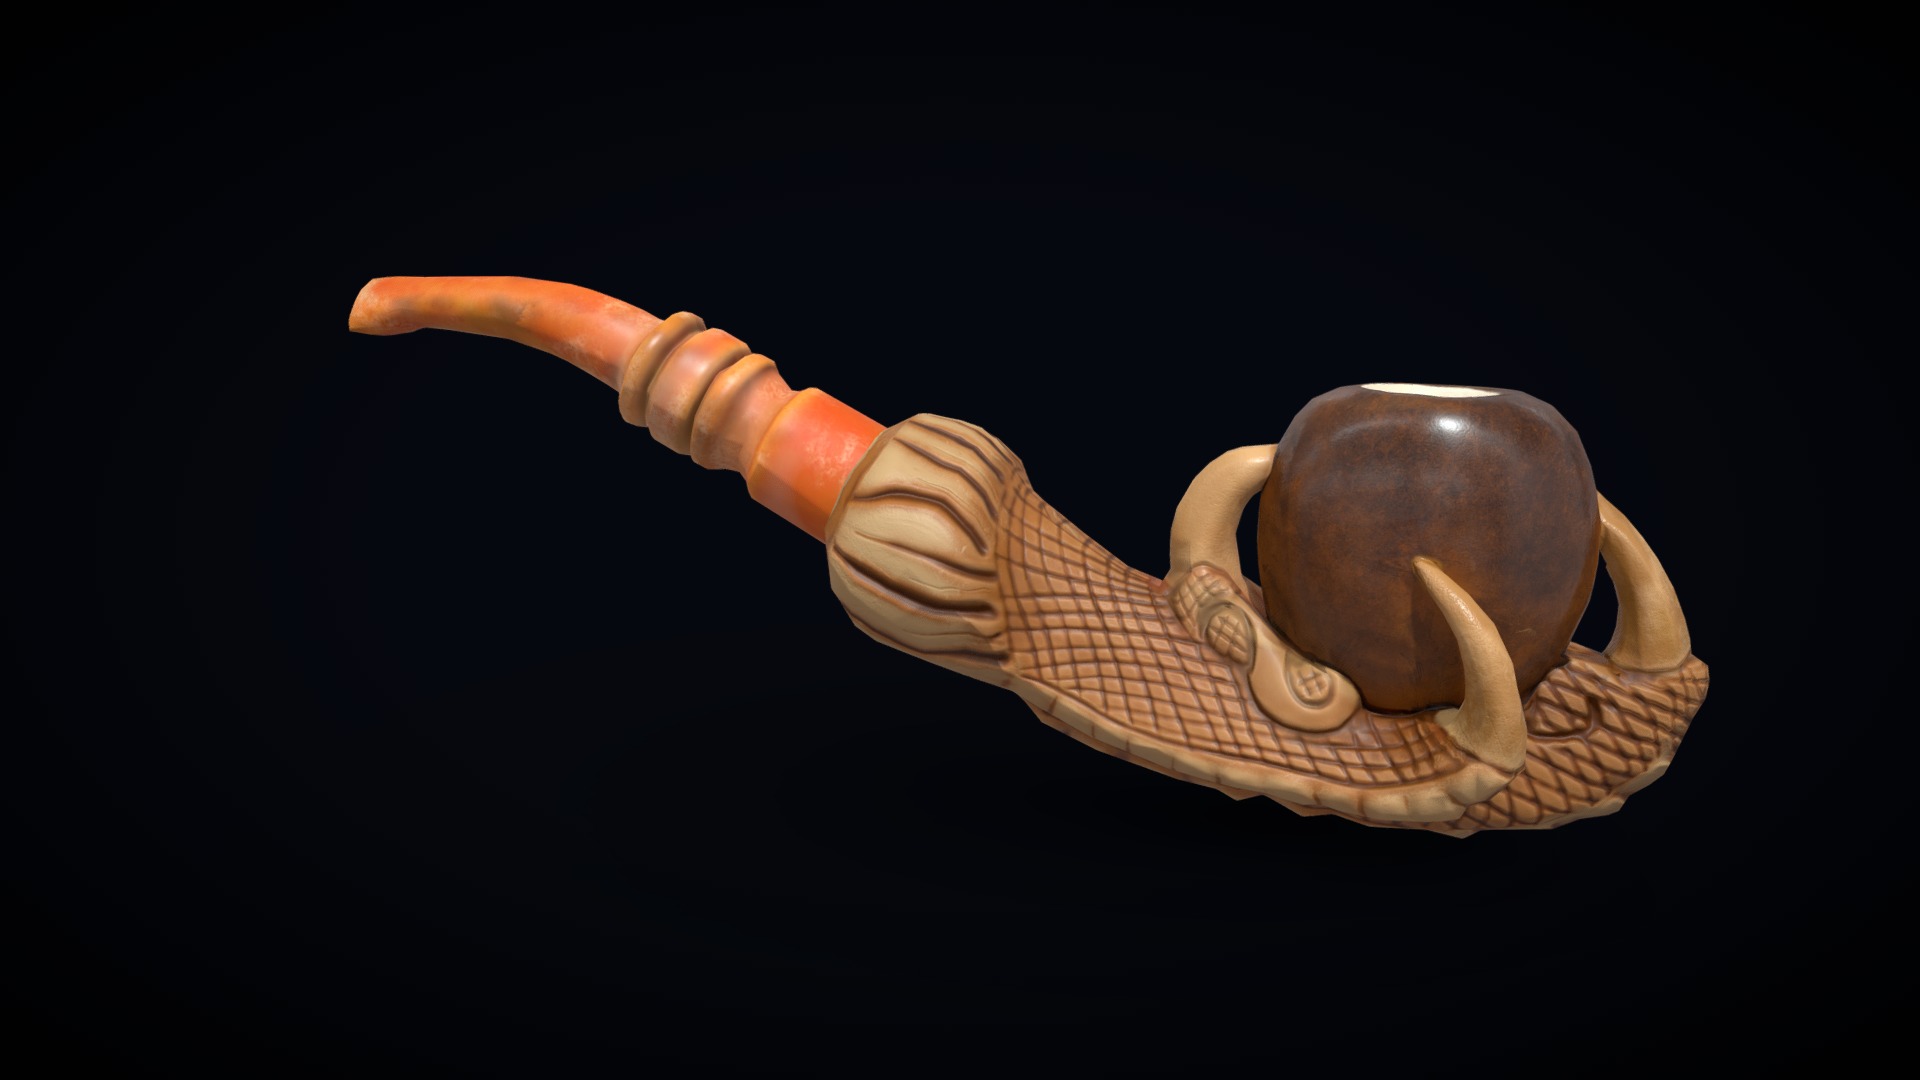 3D model Eagle claw smoking pipe - This is a 3D model of the Eagle claw smoking pipe. The 3D model is about a hand holding a planet.